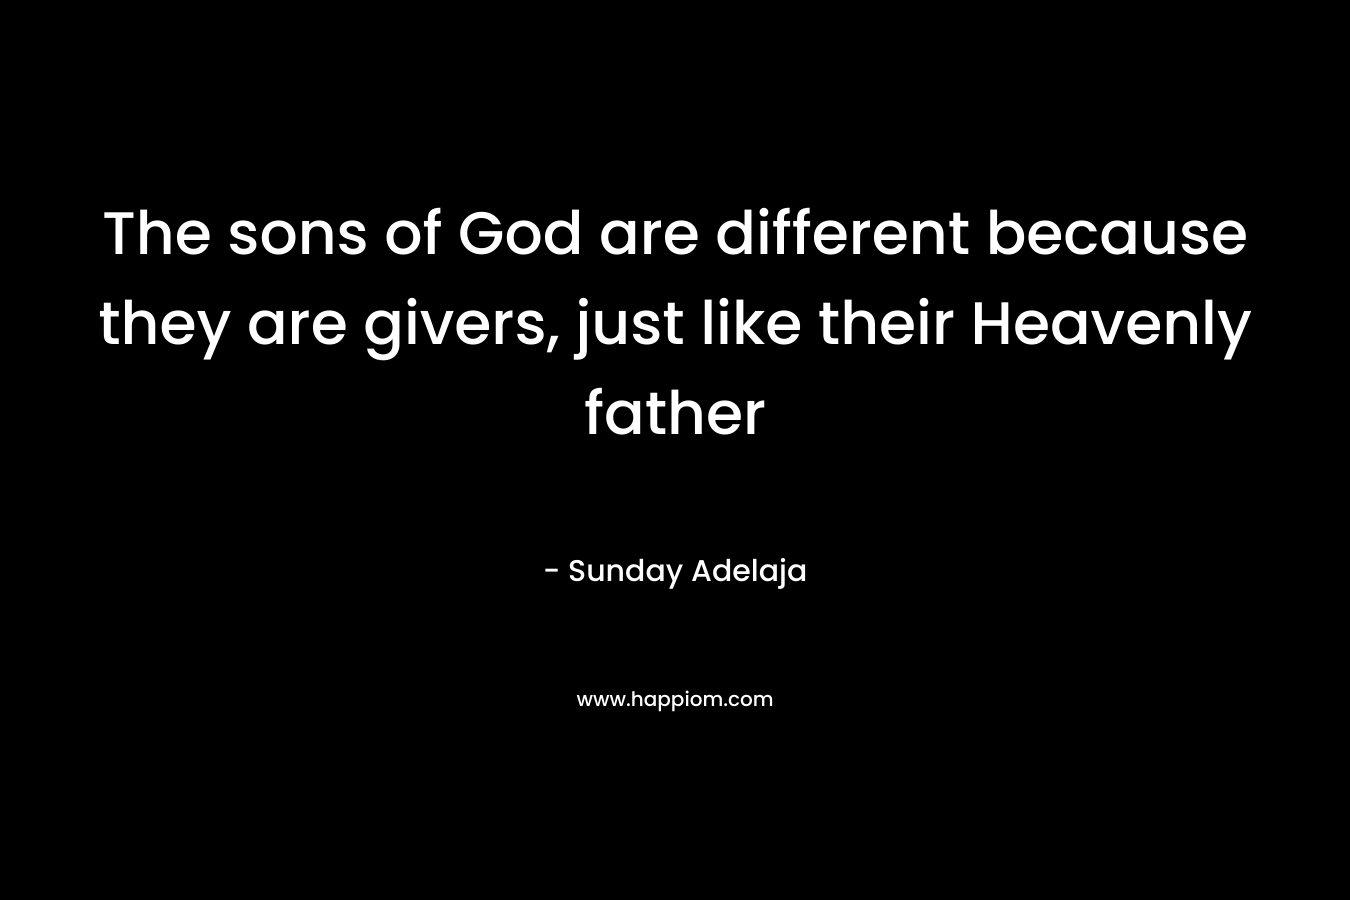 The sons of God are different because they are givers, just like their Heavenly father